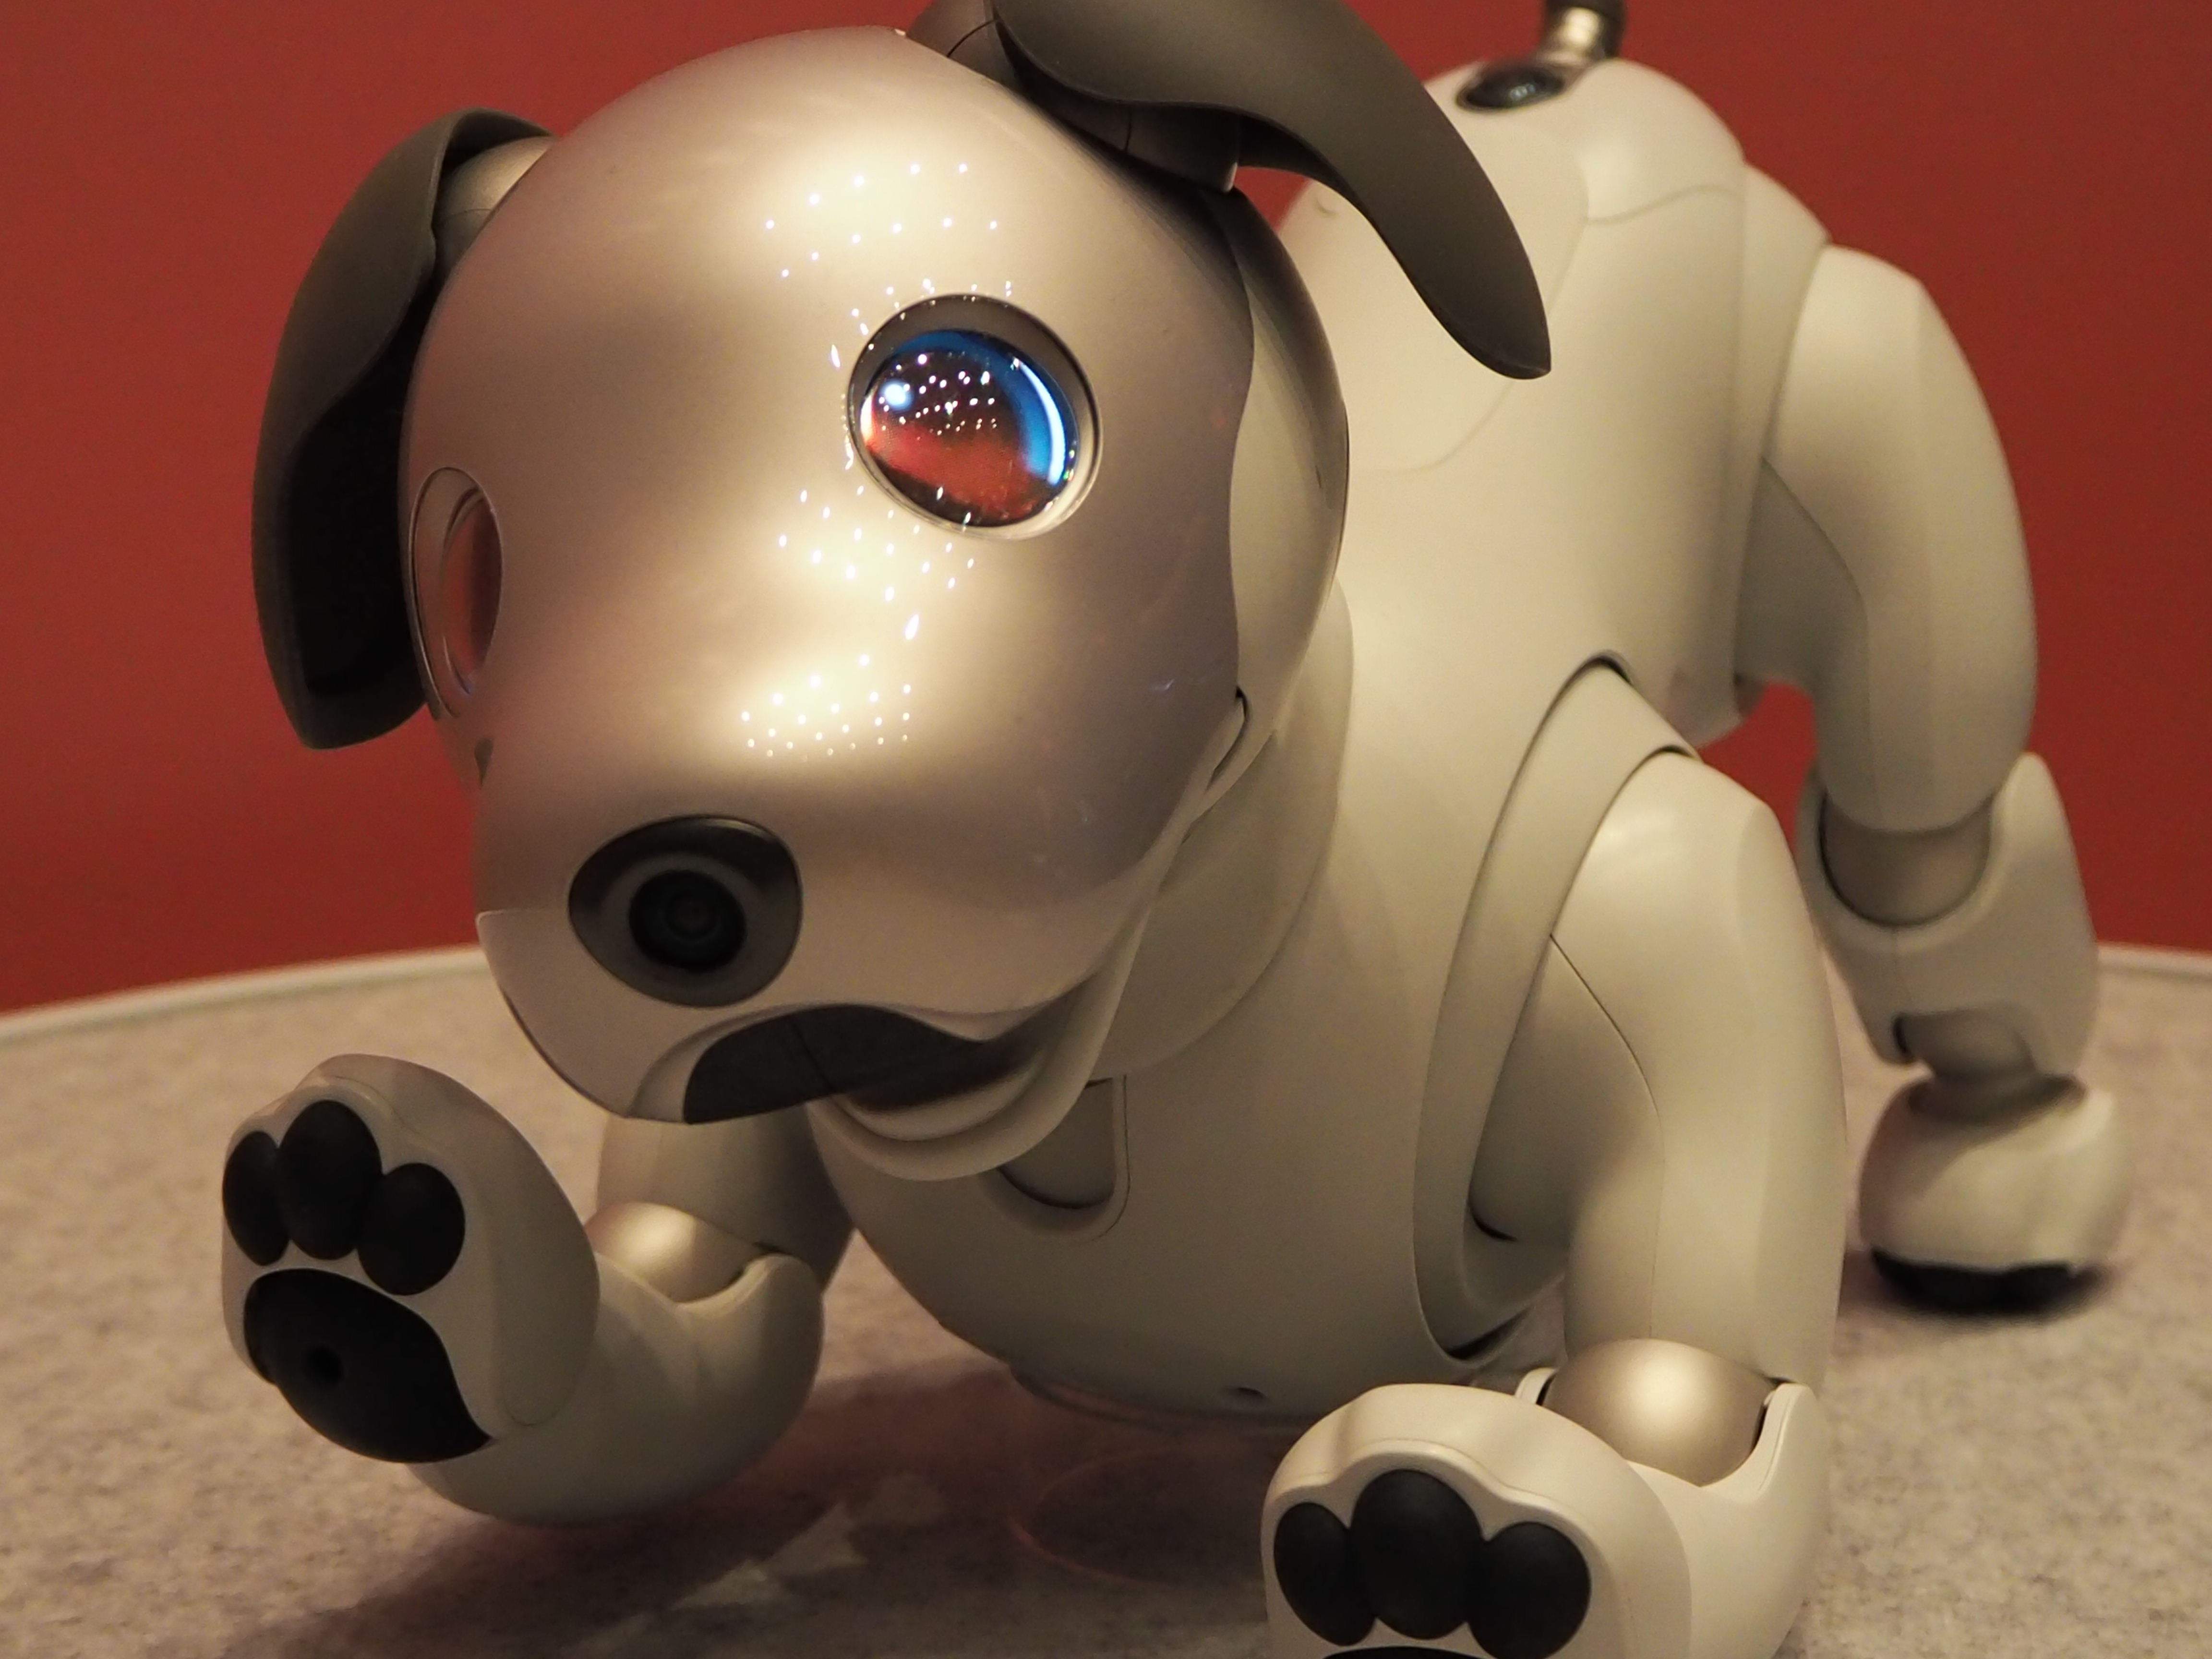 limited First Litter Edition Aibo